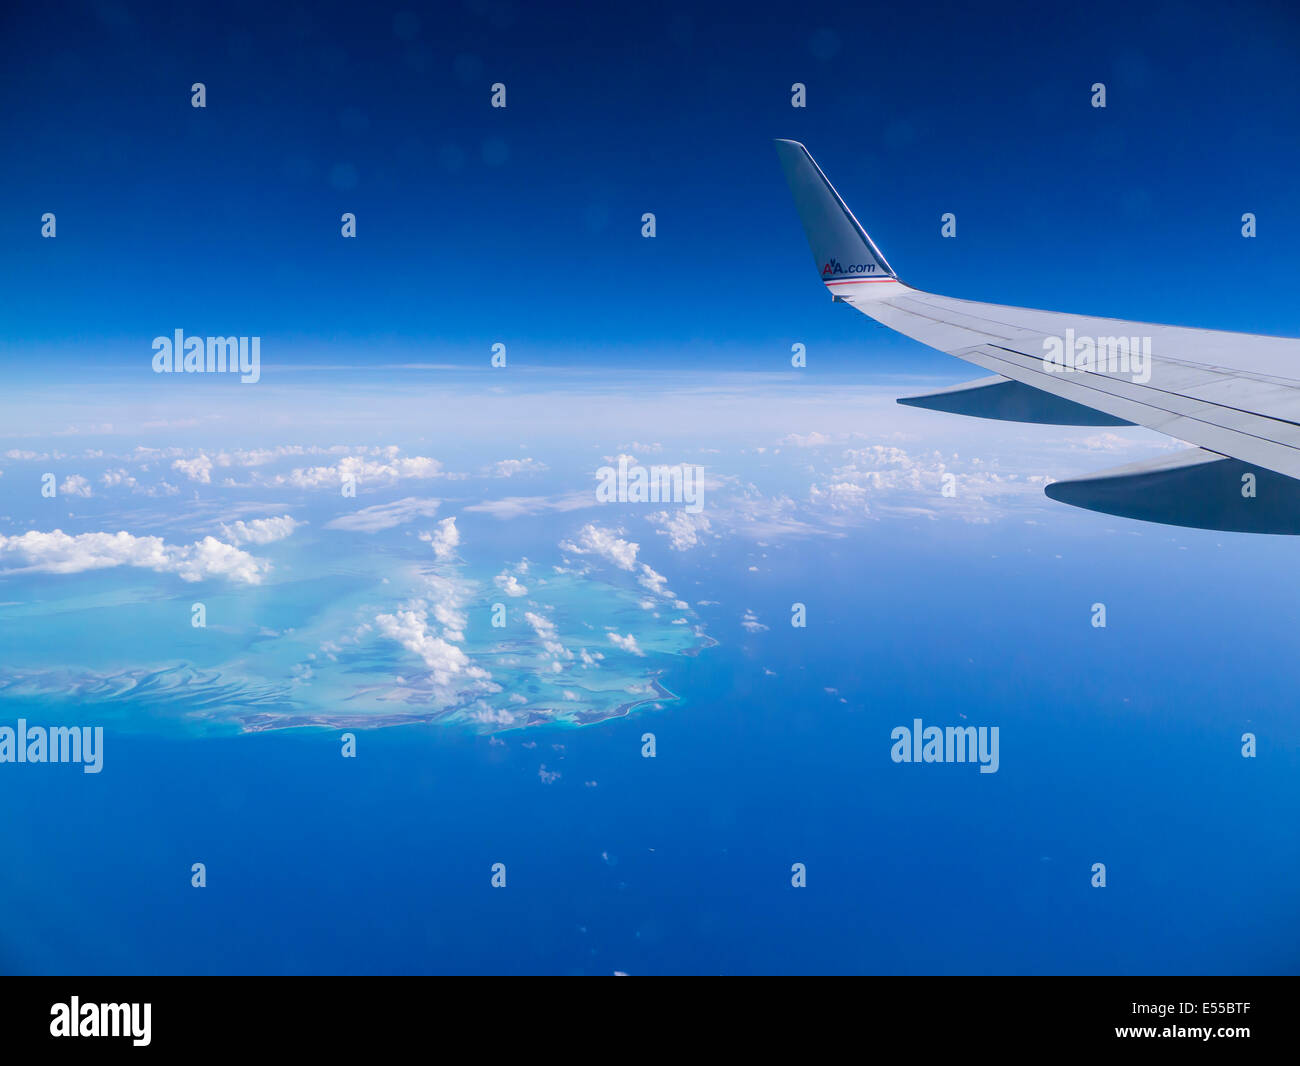 Abstract aerial view of Caribbean Sea with airplane wing in frame Stock Photo